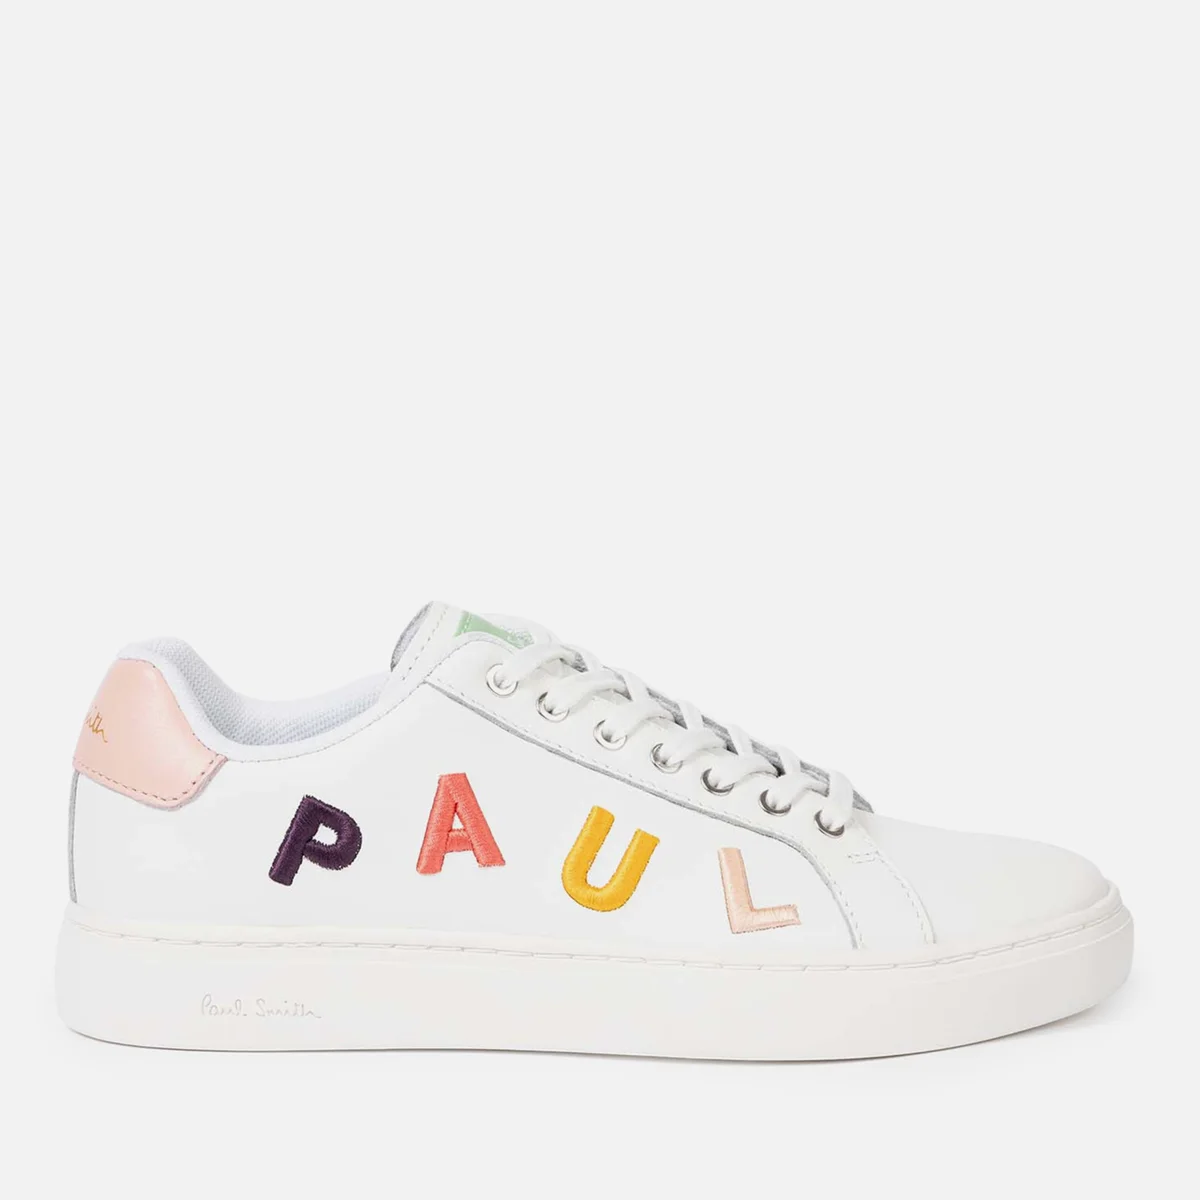 Paul Smith Women's Lapin Letters Leather Trainers Image 1